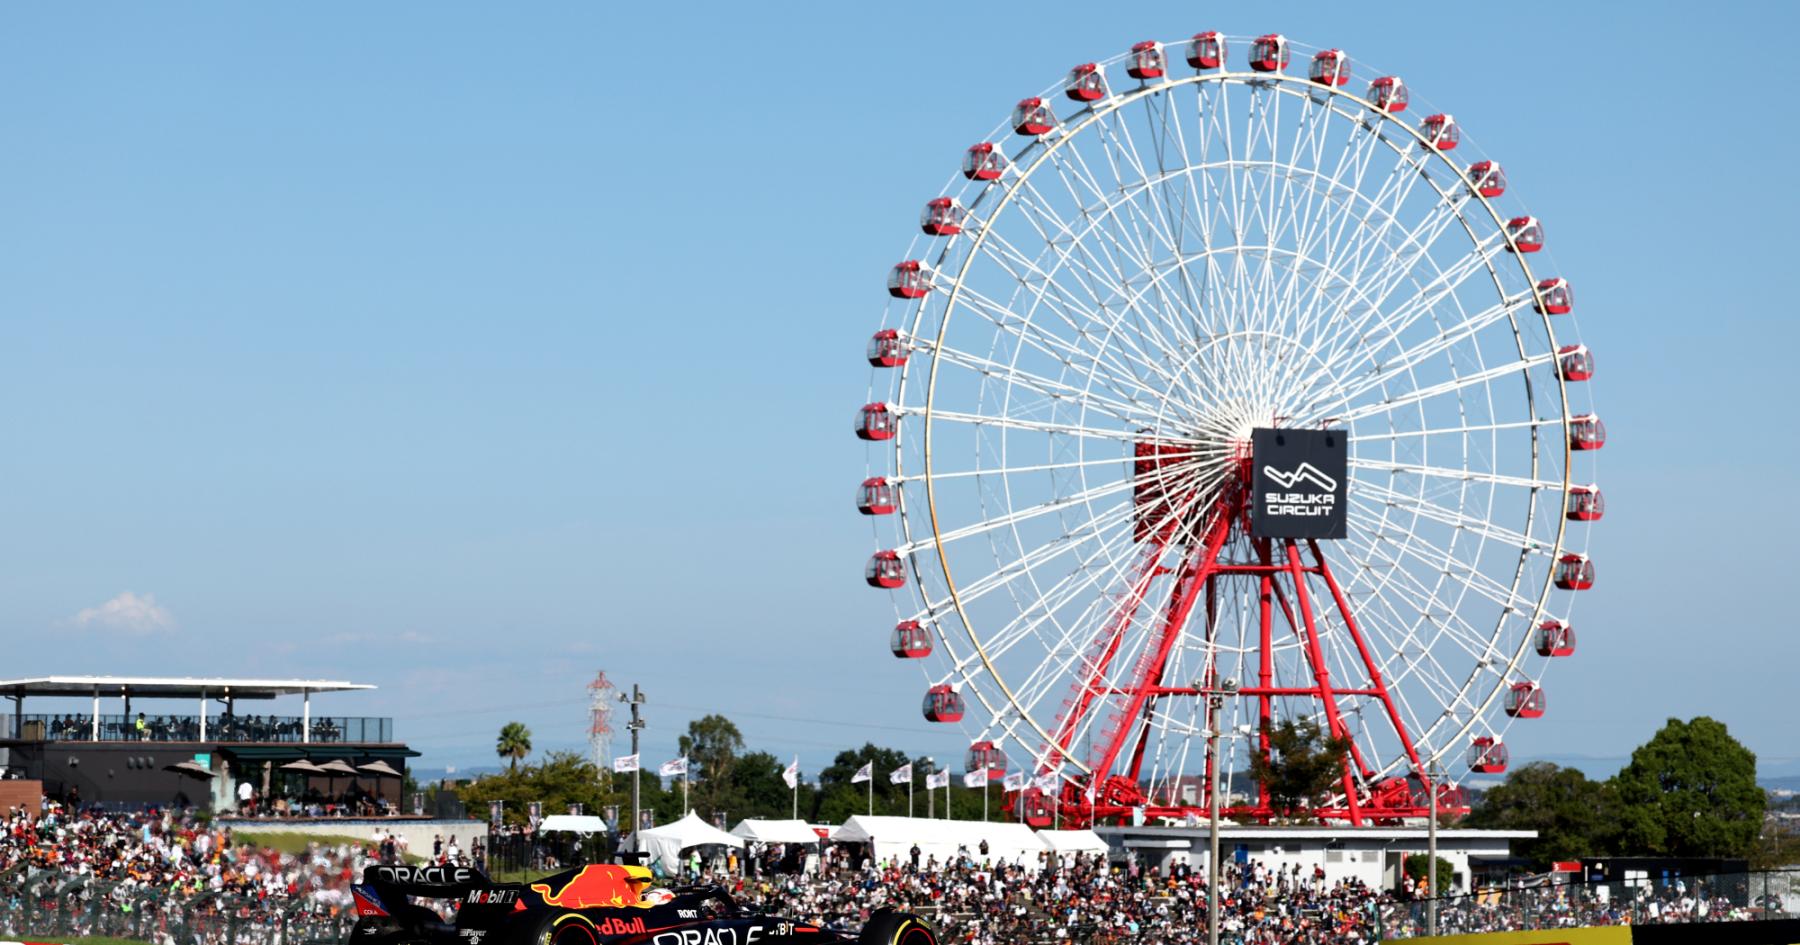 Suzuka Circuit Secures Exclusive Rights as Home of Japanese Grand Prix for Years to Come